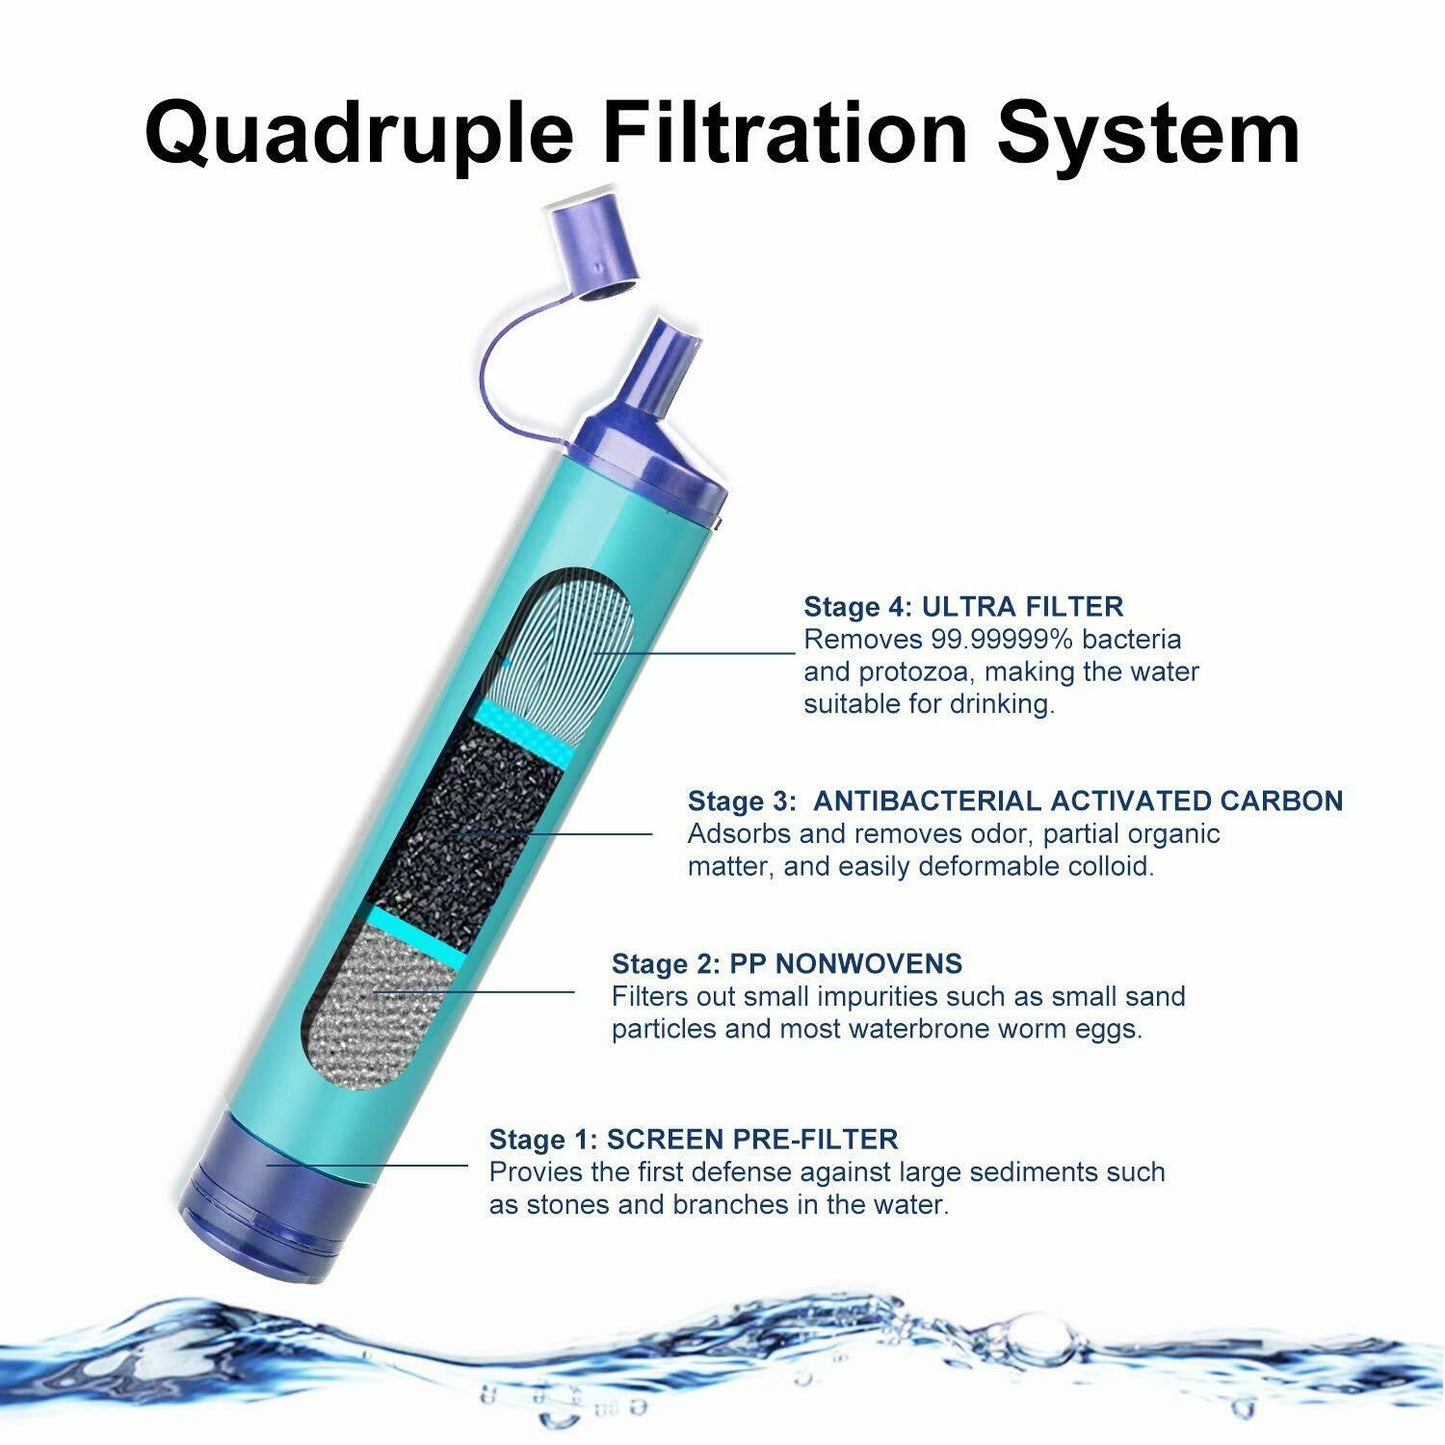 Portable Water Filter Straw Purifier Camping Emergency Gear Survival Tool